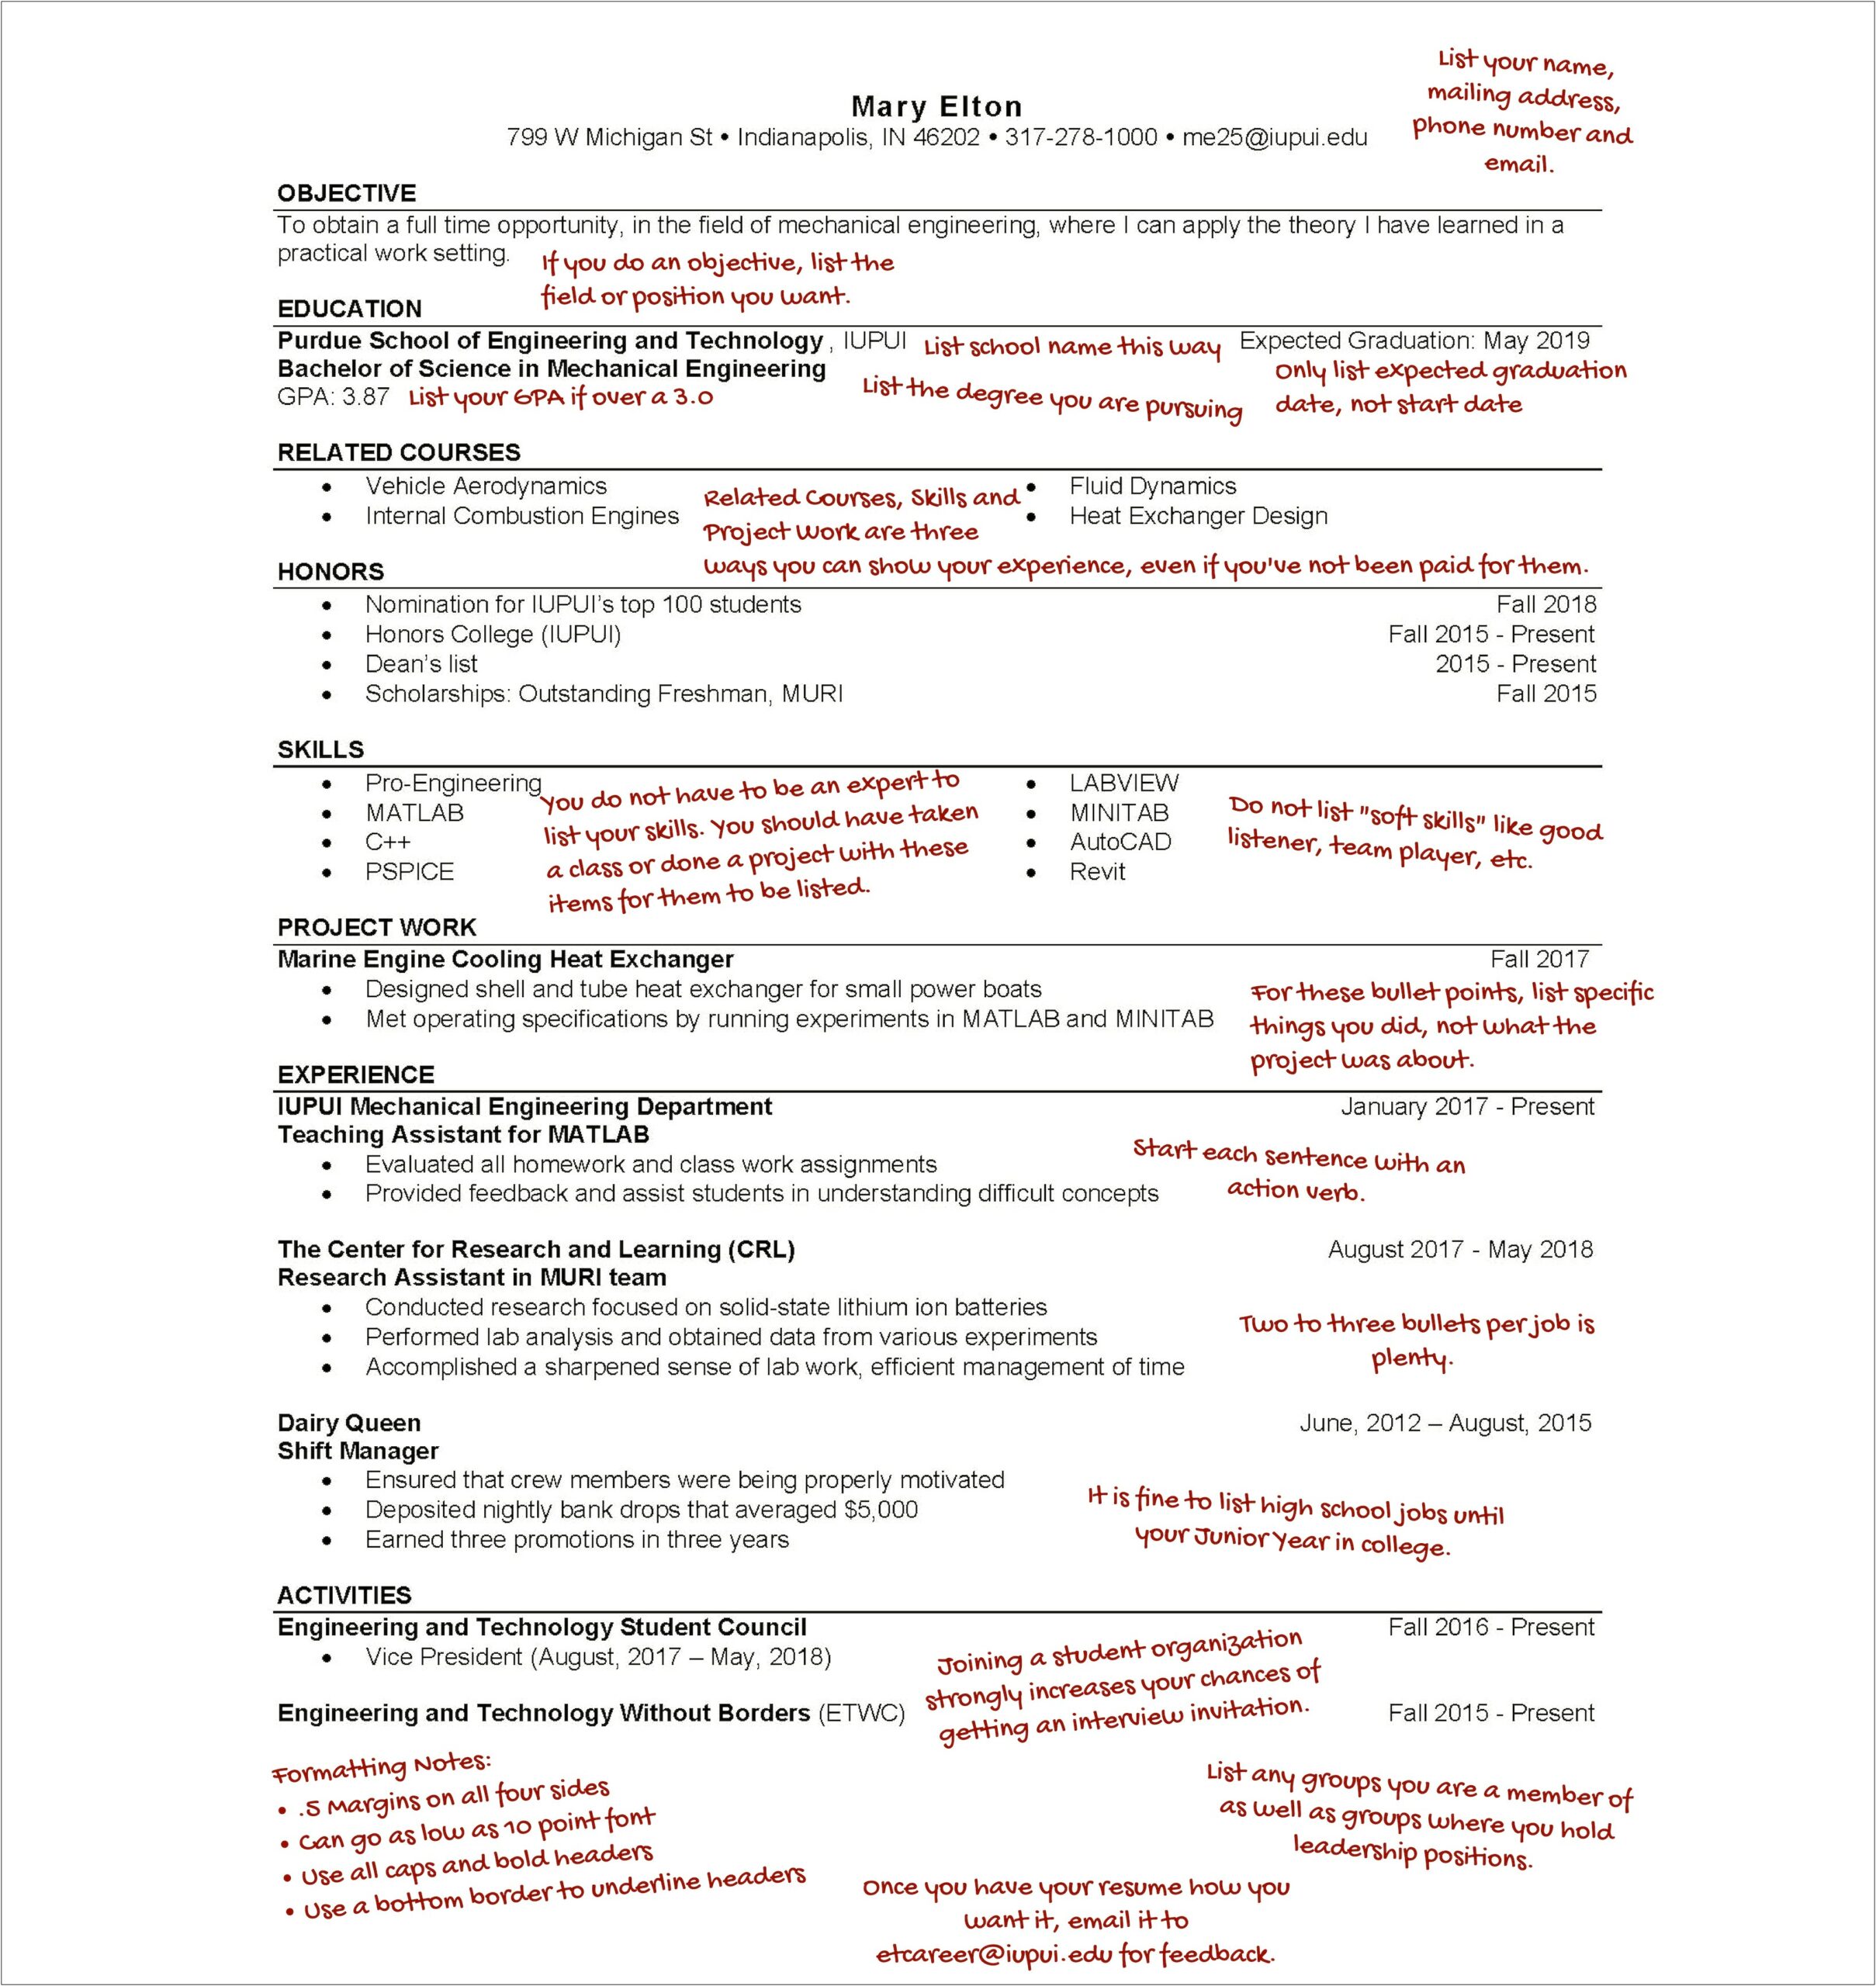 Example Resume From An Asu Engineering Major